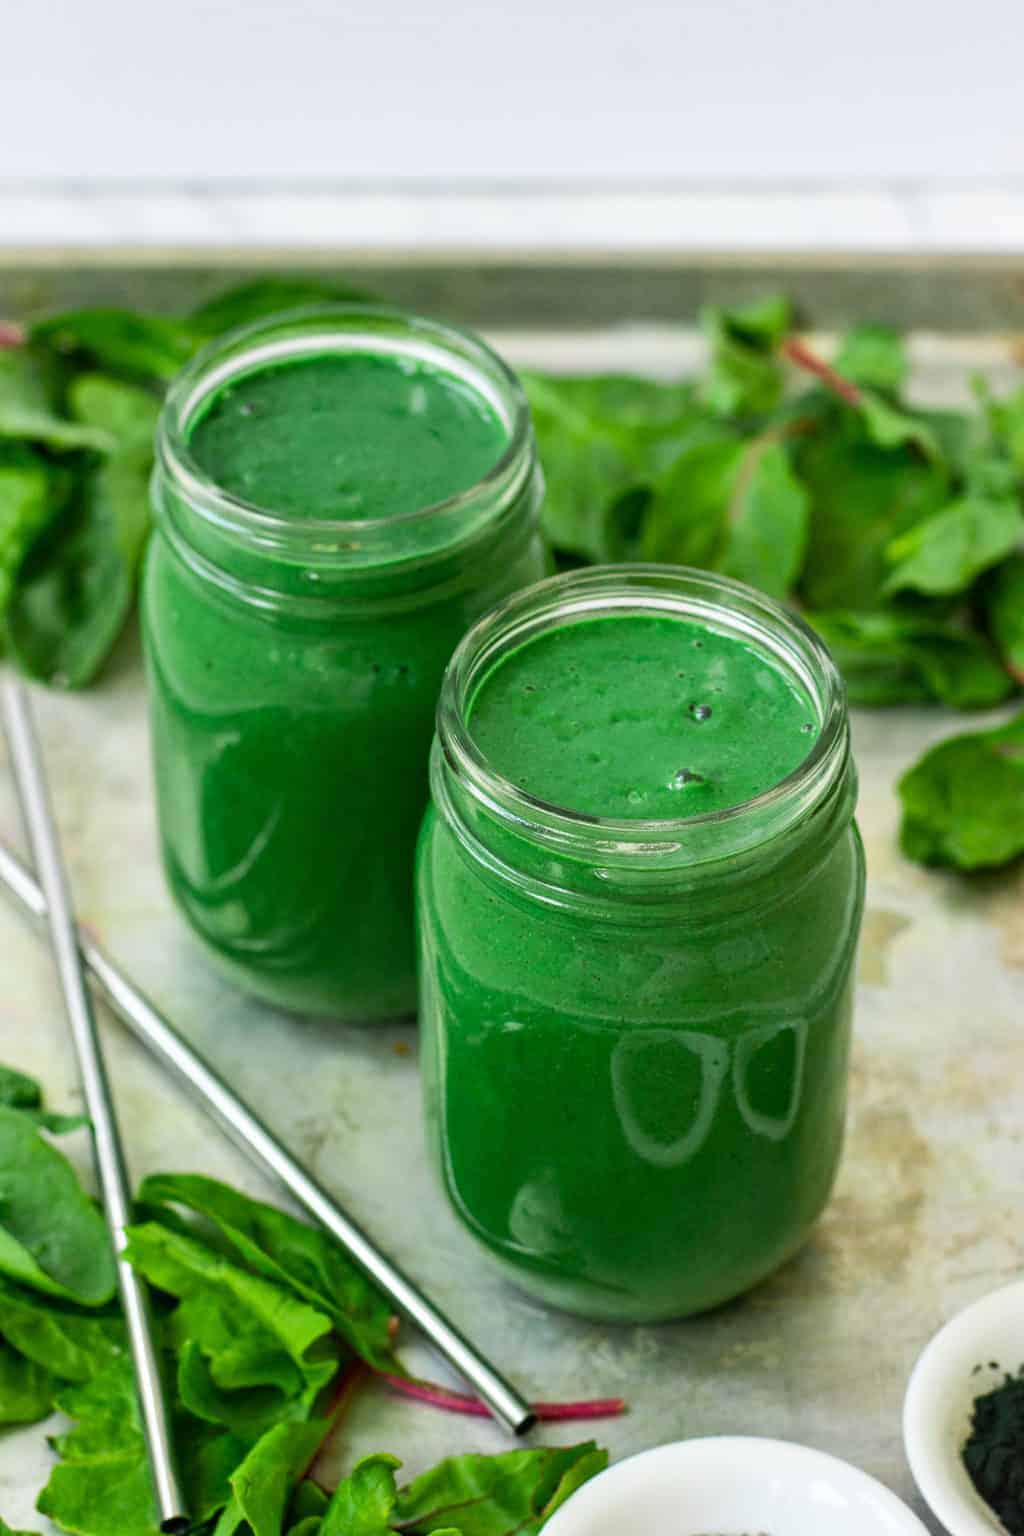 Mood Boosting Green Smoothie (The Happy Smoothie!) | Mood Boosting Smoothie | Happy Smoothie | Green Smoothie Recipe | Smoothie Recipes | Smoothie Recipes Using Herbs | Smoothie Recipe to Boost Your Mood || The Butter Half #smoothie #thebutterhalf